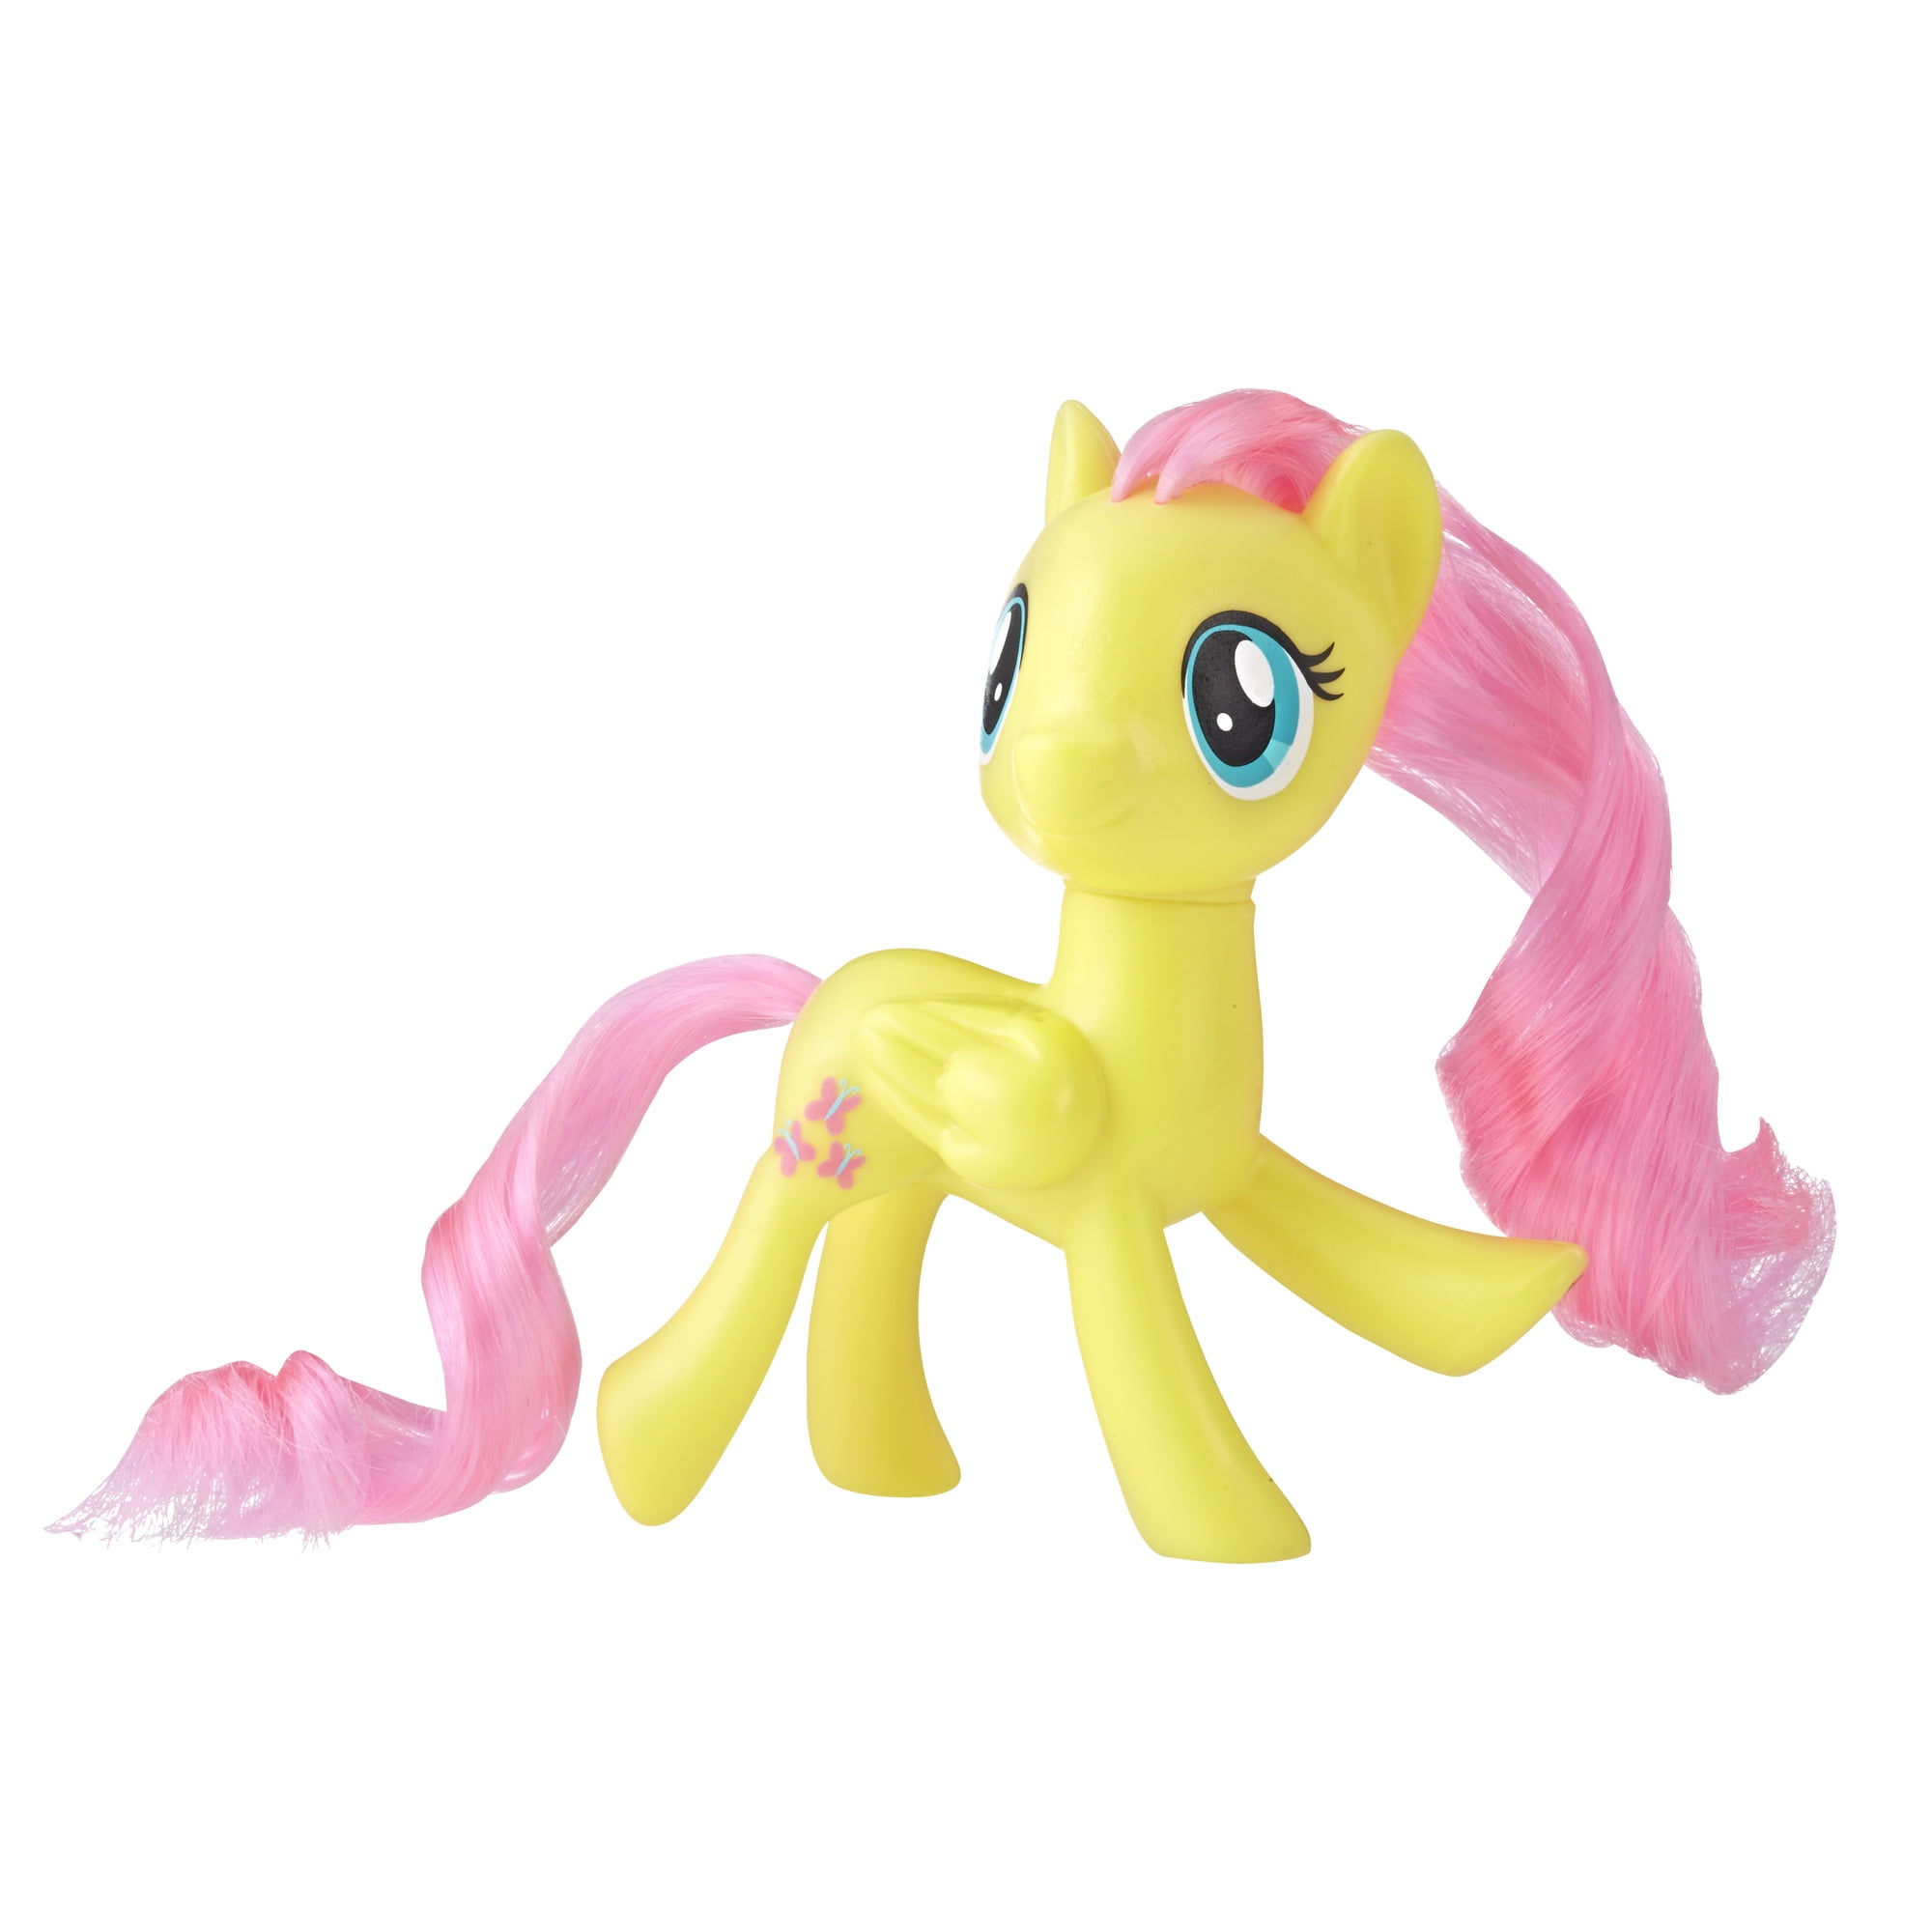 My Little Pony Fluttershy Blind Bag Small Cake-Topper 1" Figure Good Condition 